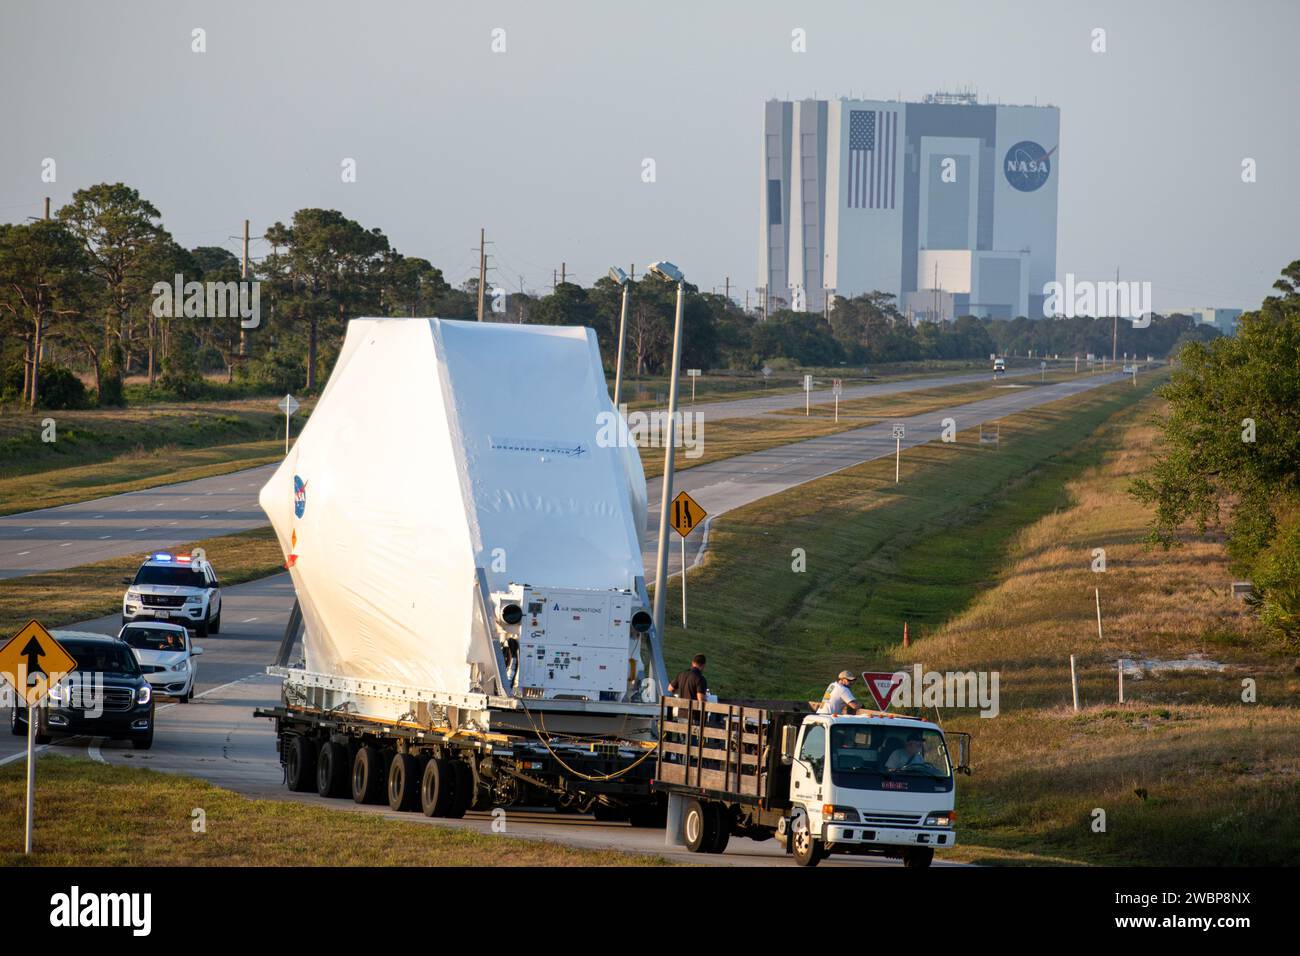 NASA’s Orion spacecraft, protected in its shipping container, is loaded onto a transporter at the Launch and Landing Facility at Kennedy Space Center for its move to the Neil Armstrong Operations and Checkout Building on March 25, 2020. After testing at NASA’s Plum Brook Station in Ohio verified it can handle the extreme conditions of a deep-space environment, the spacecraft – carried by the agency’s Super Guppy aircraft – has returned to the Florida spaceport for final testing and assembly. Following this, Orion will be integrated with the Space Launch System rocket for Artemis I – the first Stock Photo